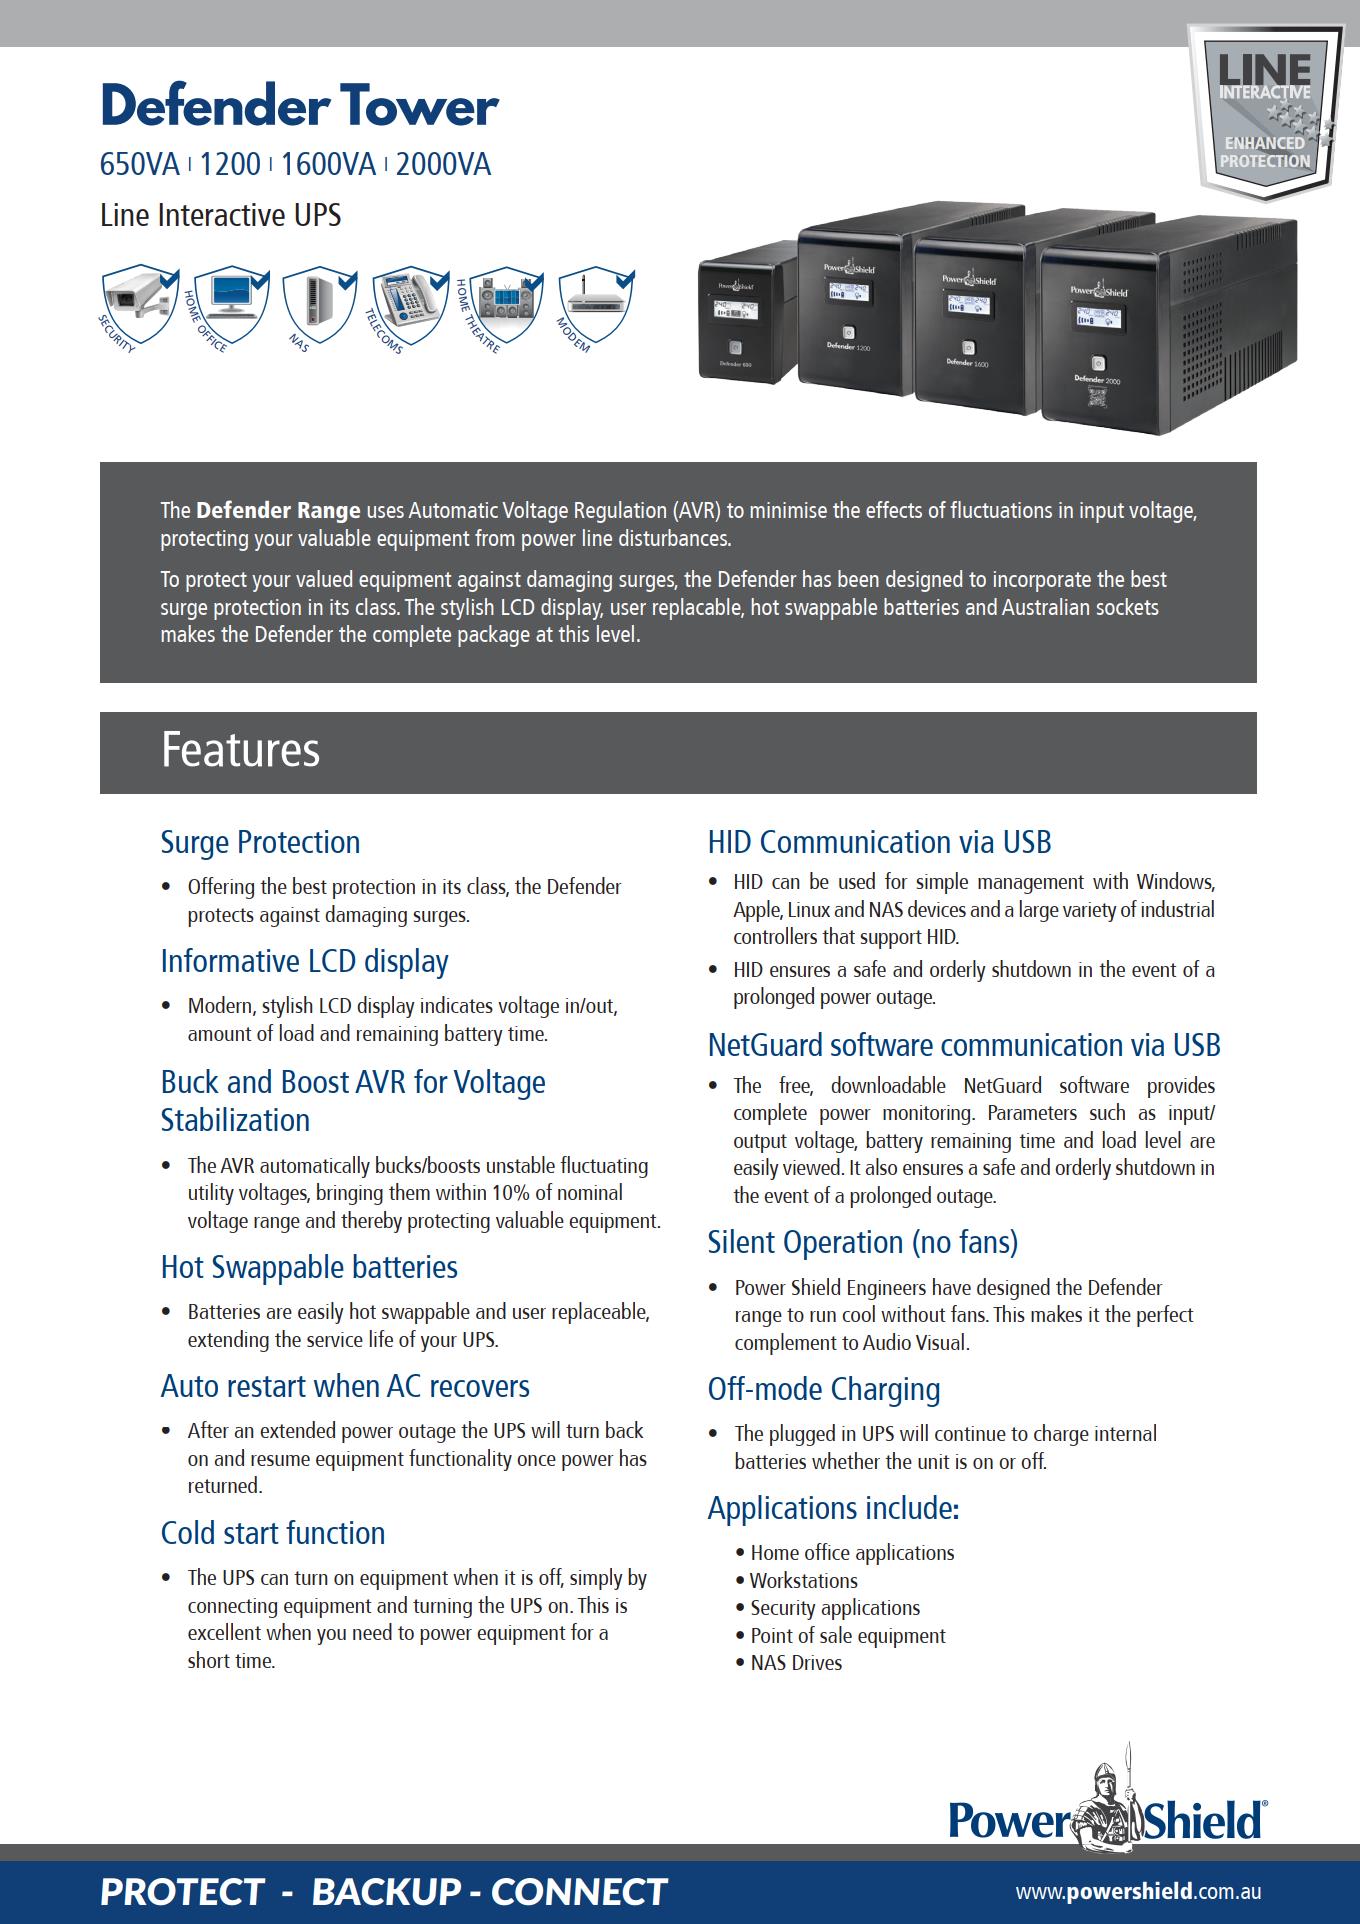 A large marketing image providing additional information about the product PowerShield Defender LCD 2KVA UPS - Additional alt info not provided